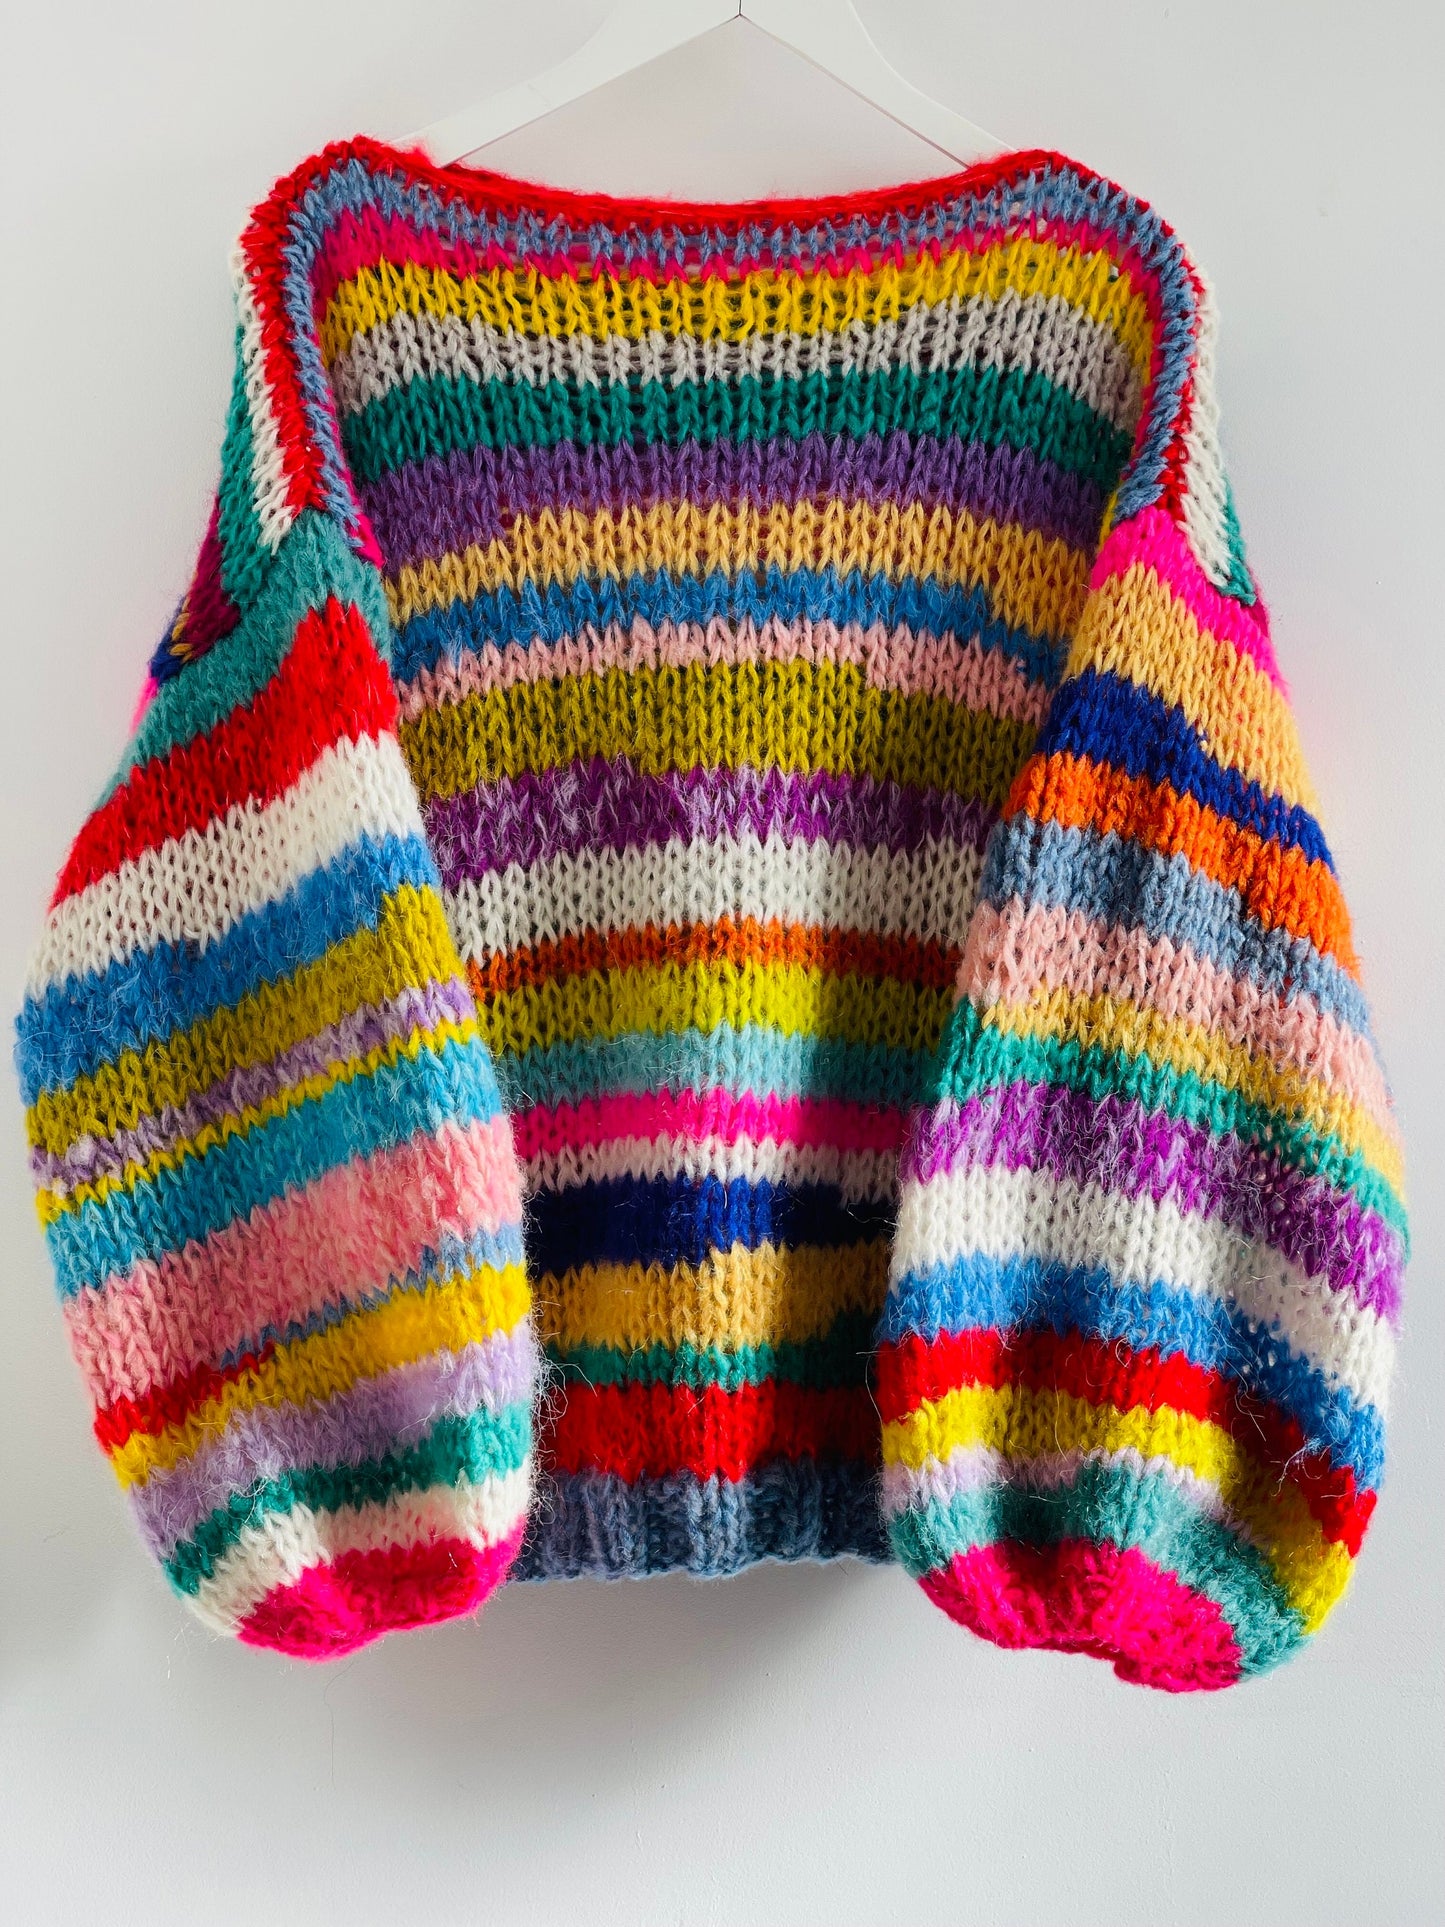 JOY 2 Oversized Rainbow Pullover, Hand Knit Jumper, Hand Knit Chunky Sweater with Balloon Sleeves, Multicolor Sweater, Mohair Sweater